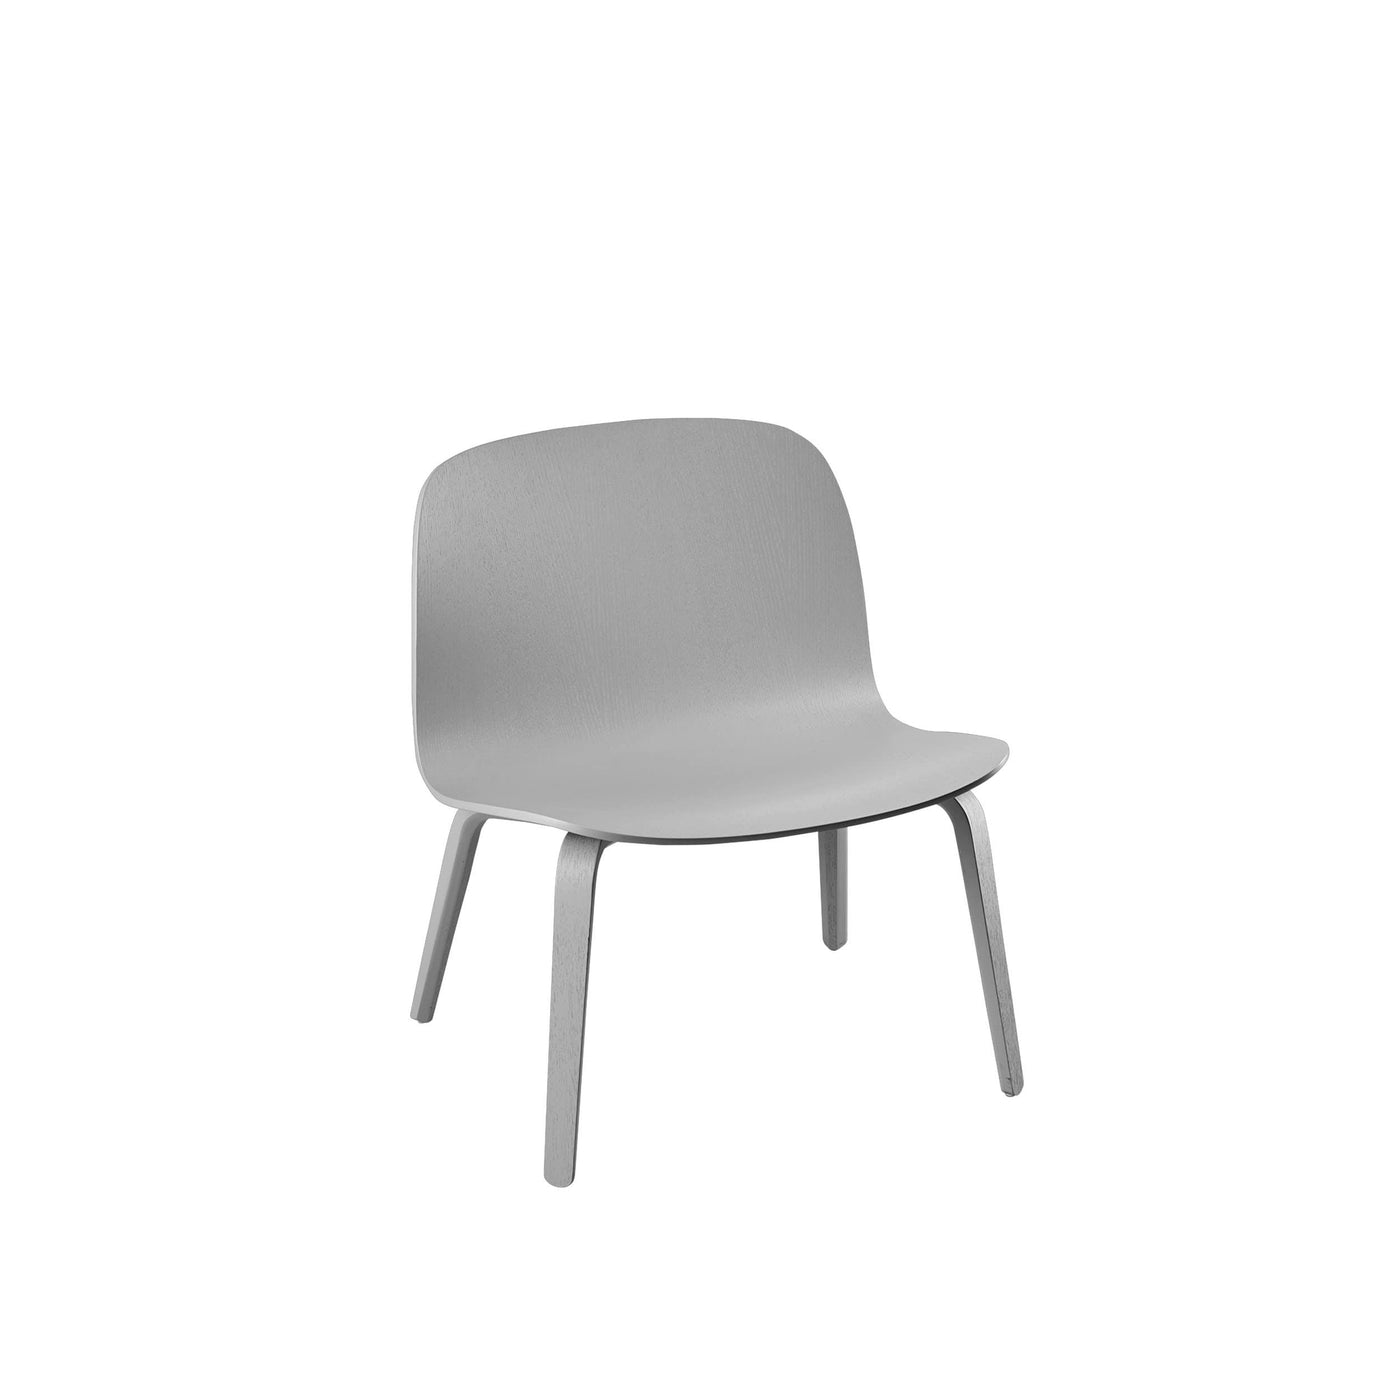 Muuto Visu Lounge Chair in grey, available from someday designs. #colour_grey